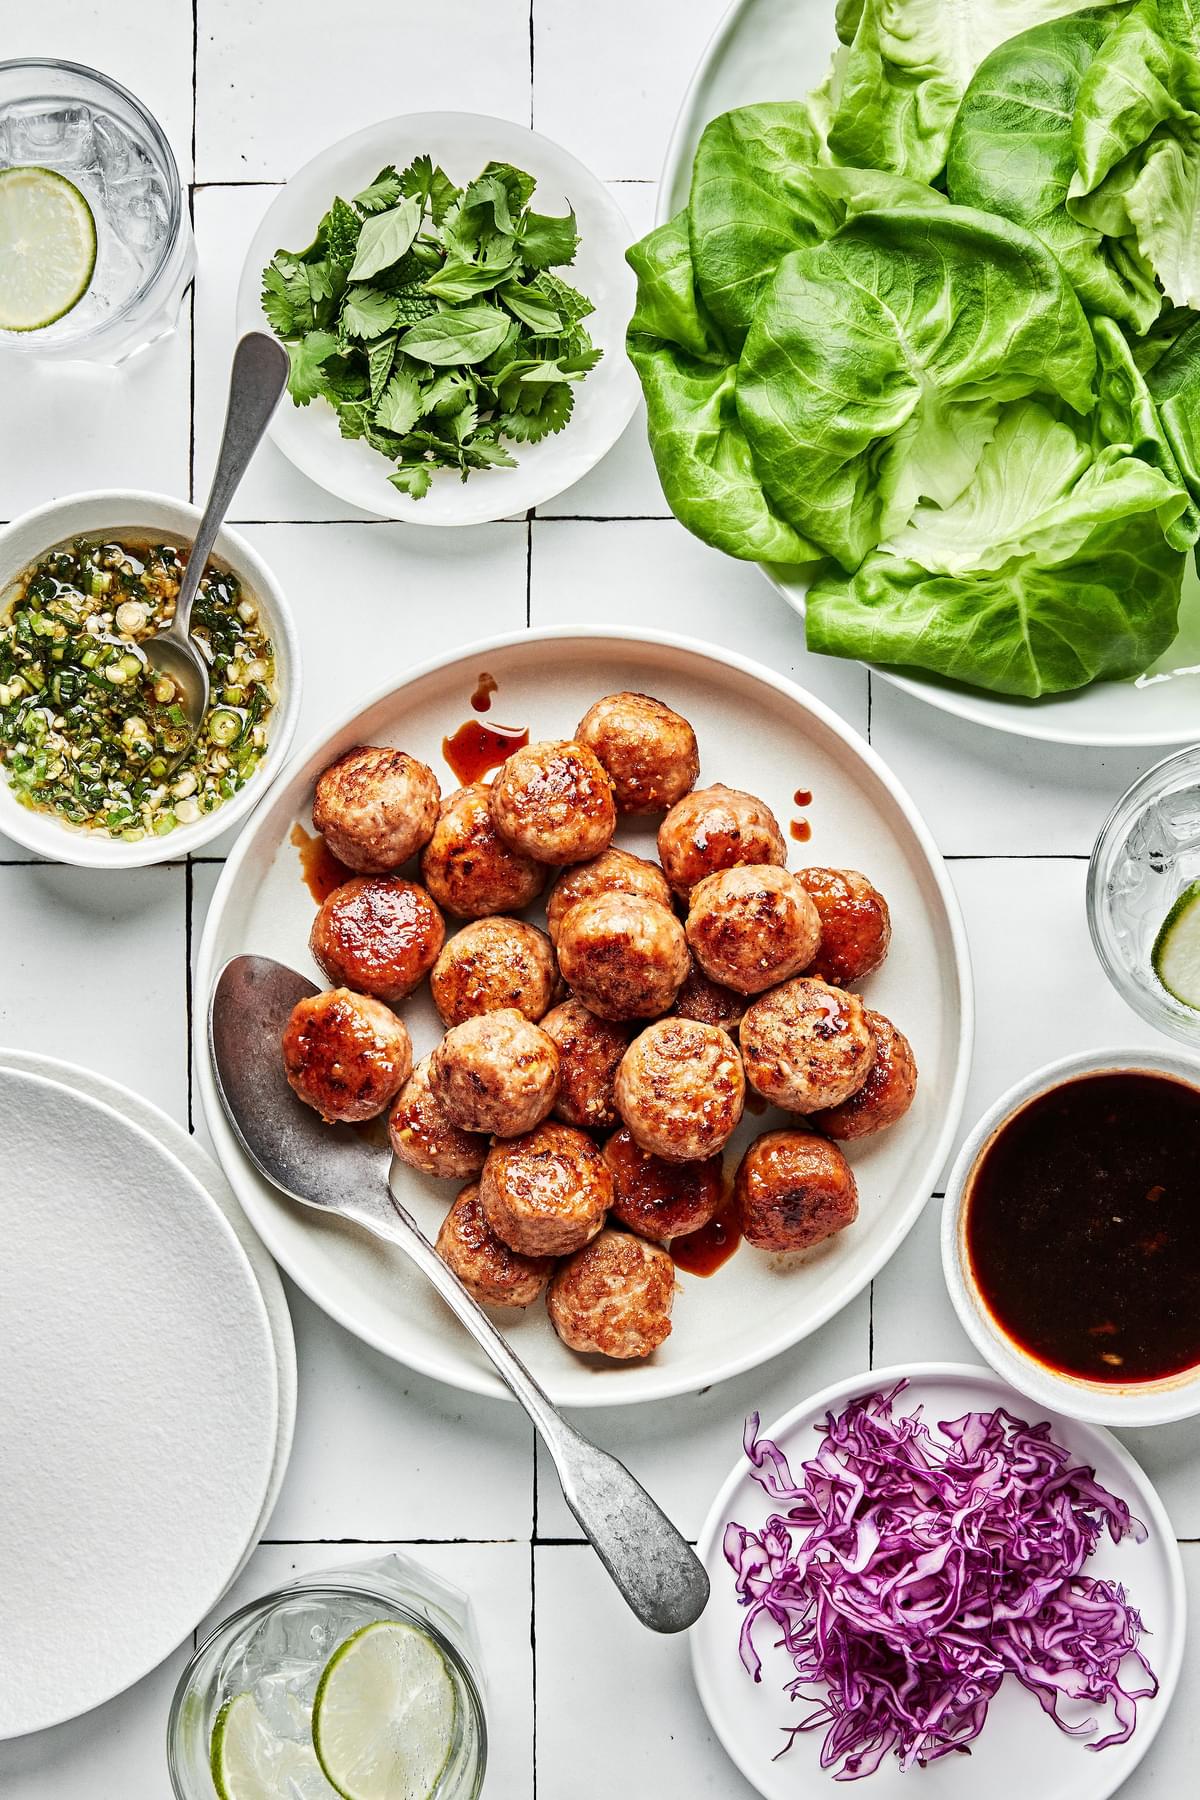 lemongrass meatballs, butter lettuce, brown sugar sauce, green onion oil and shredded red cabbage in bowls for lettuce cups